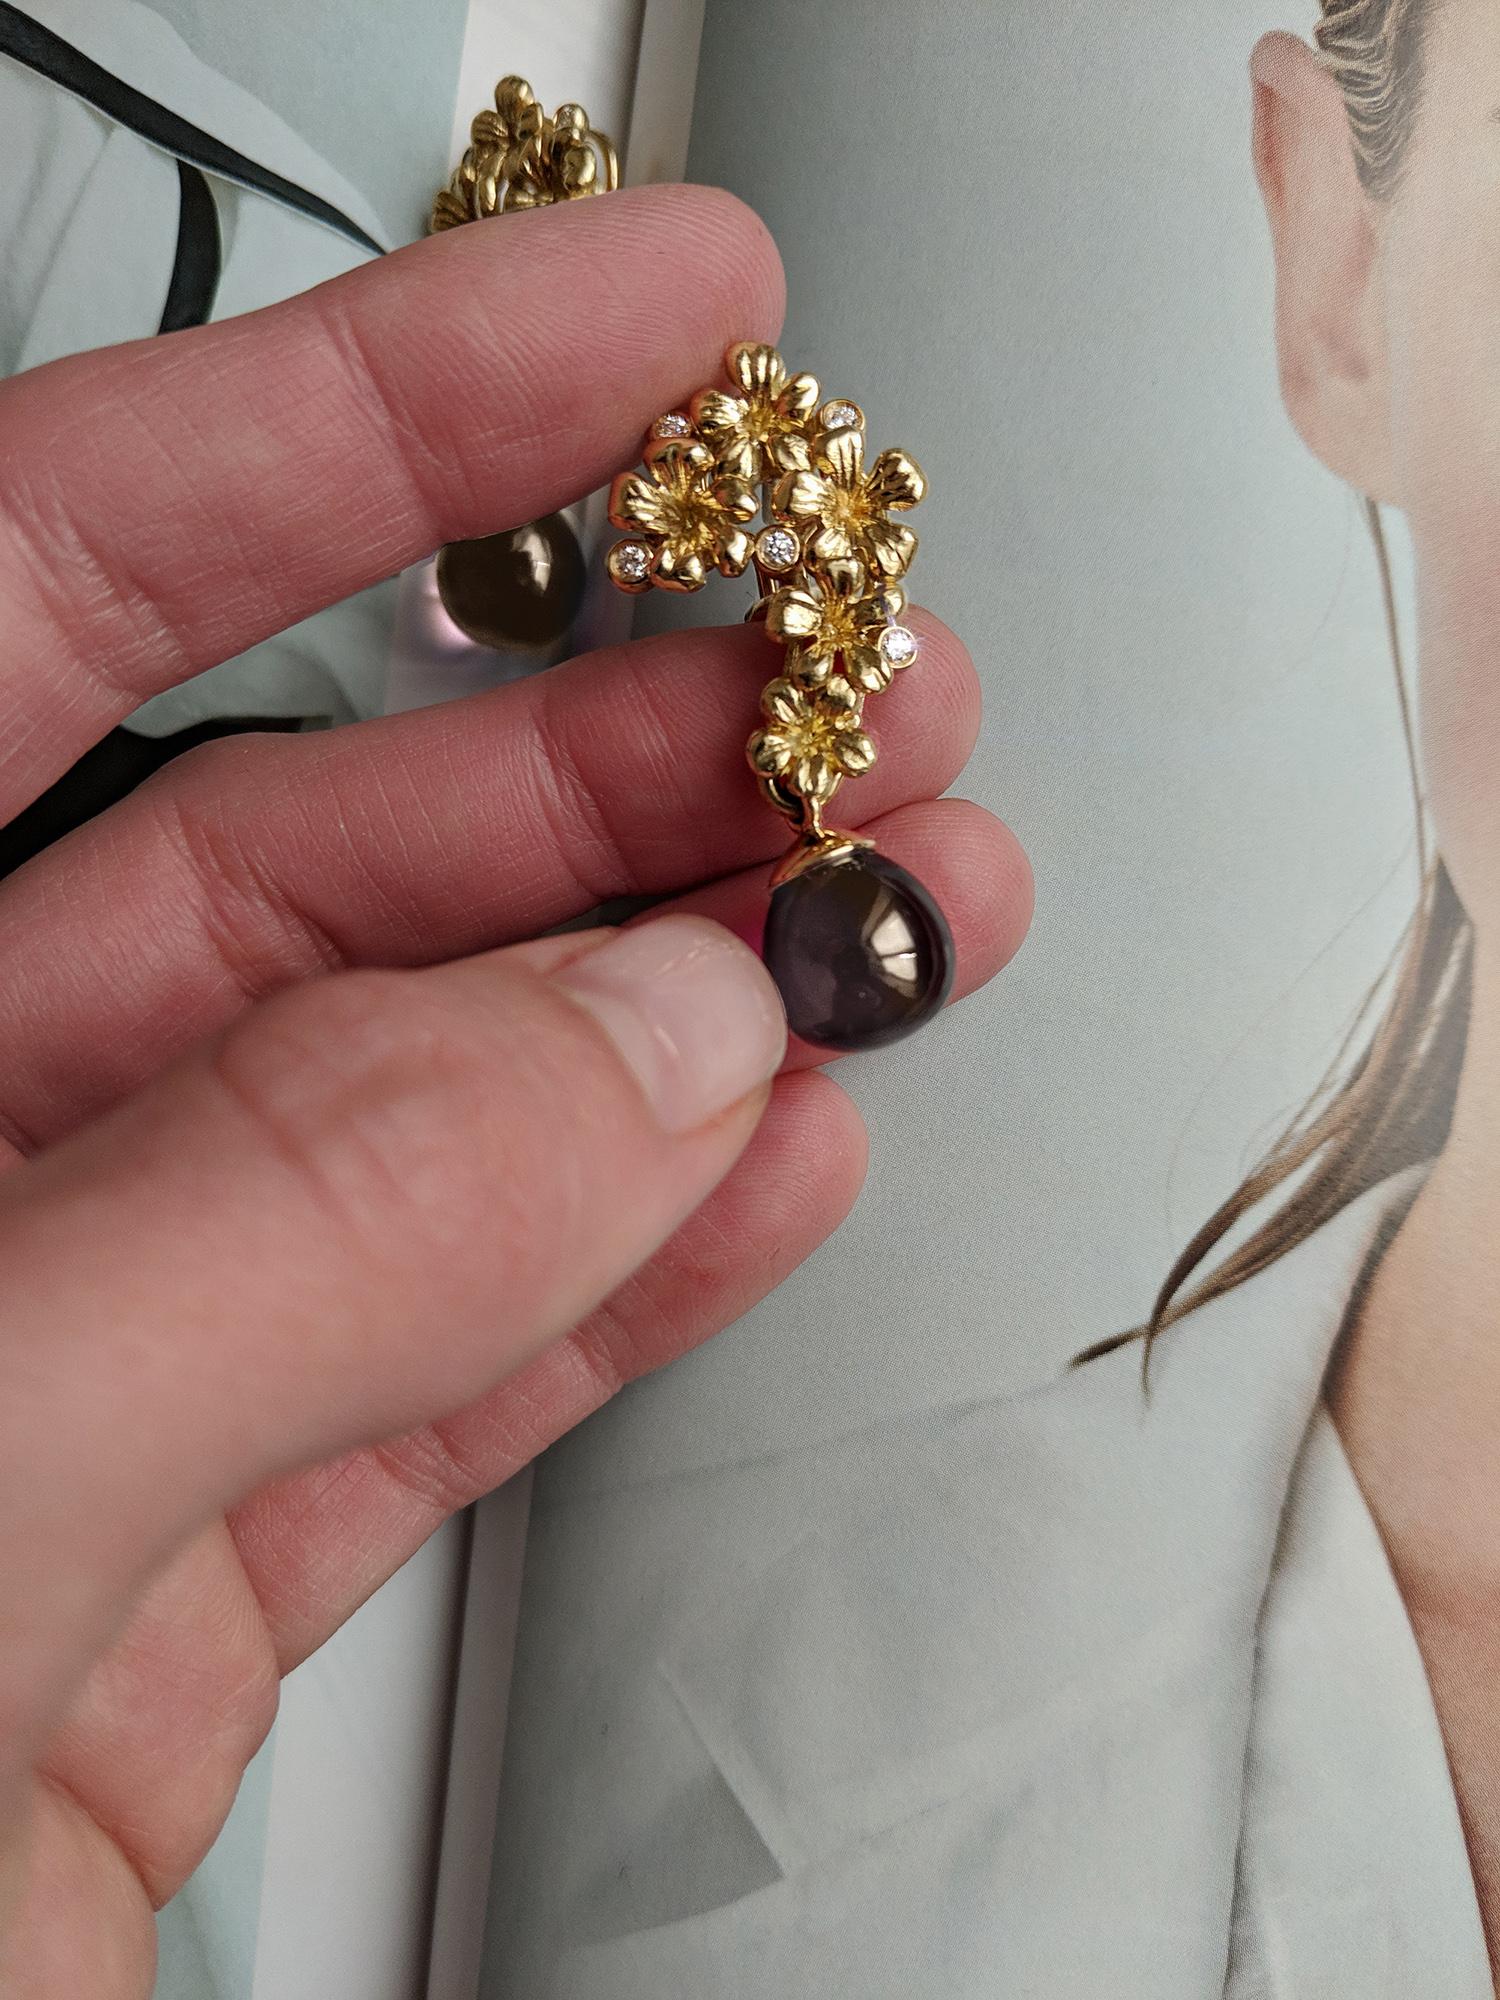 This Plum Blossom Pendant Necklace is made with 18 karat yellow gold, encrusted with 5 round diamonds and a removable cabochon smoky quartz. It has been featured in a Vogue UA review and we take pride in using top-quality natural diamonds (VS, F-G)